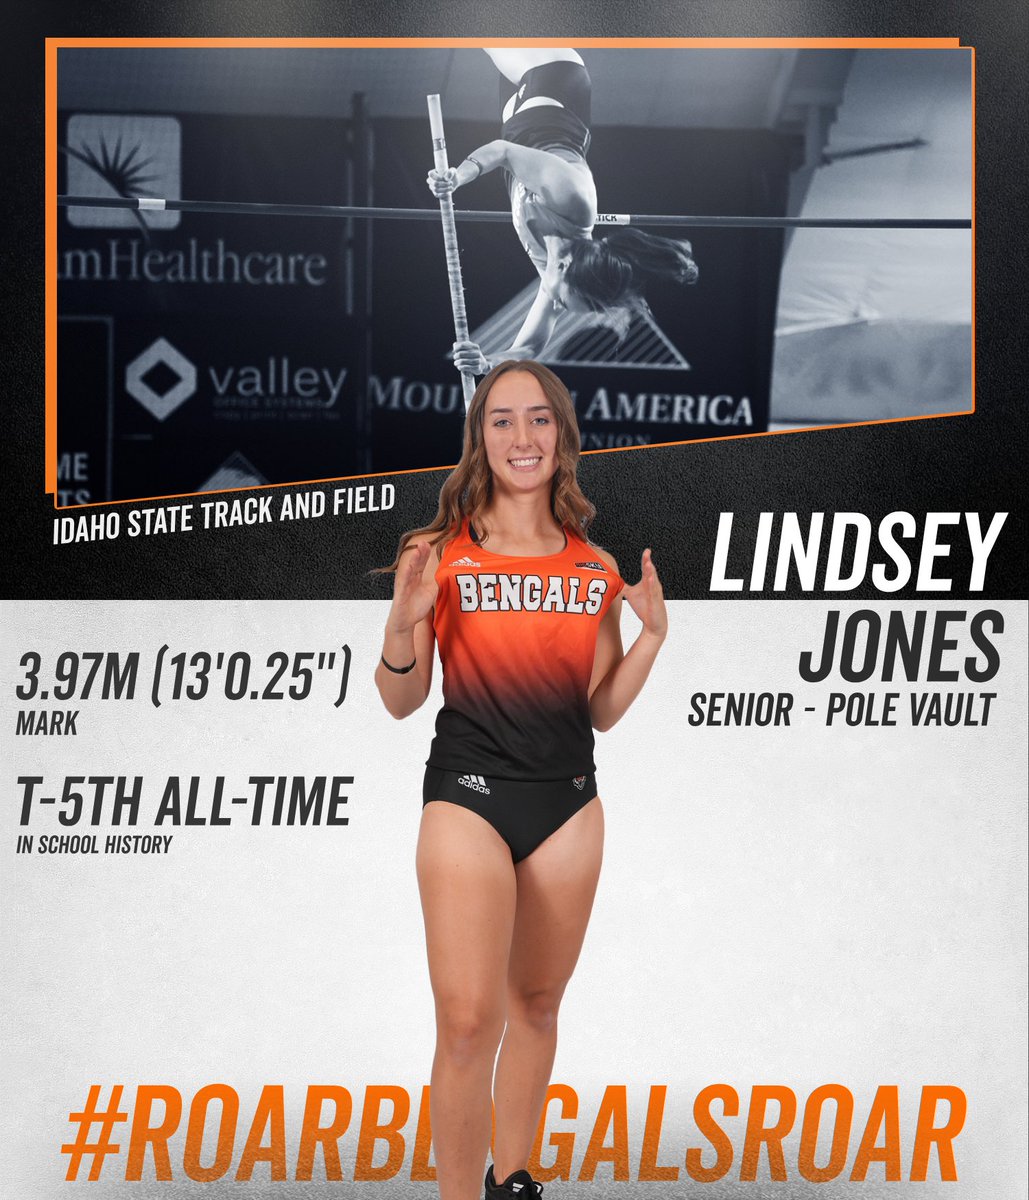 Lindsey had herself a (senior) 𝘿𝘼𝙔 at the Bengal Invite!

In her final home meet as a Bengal, she recorded a PR of 3.97m (13'0.25') in the Pole Vault, tying her for fifth all-time in school history! 🔥🔥🔥

#RoarBengalsRoar #NCAATF #OutdoorSeason